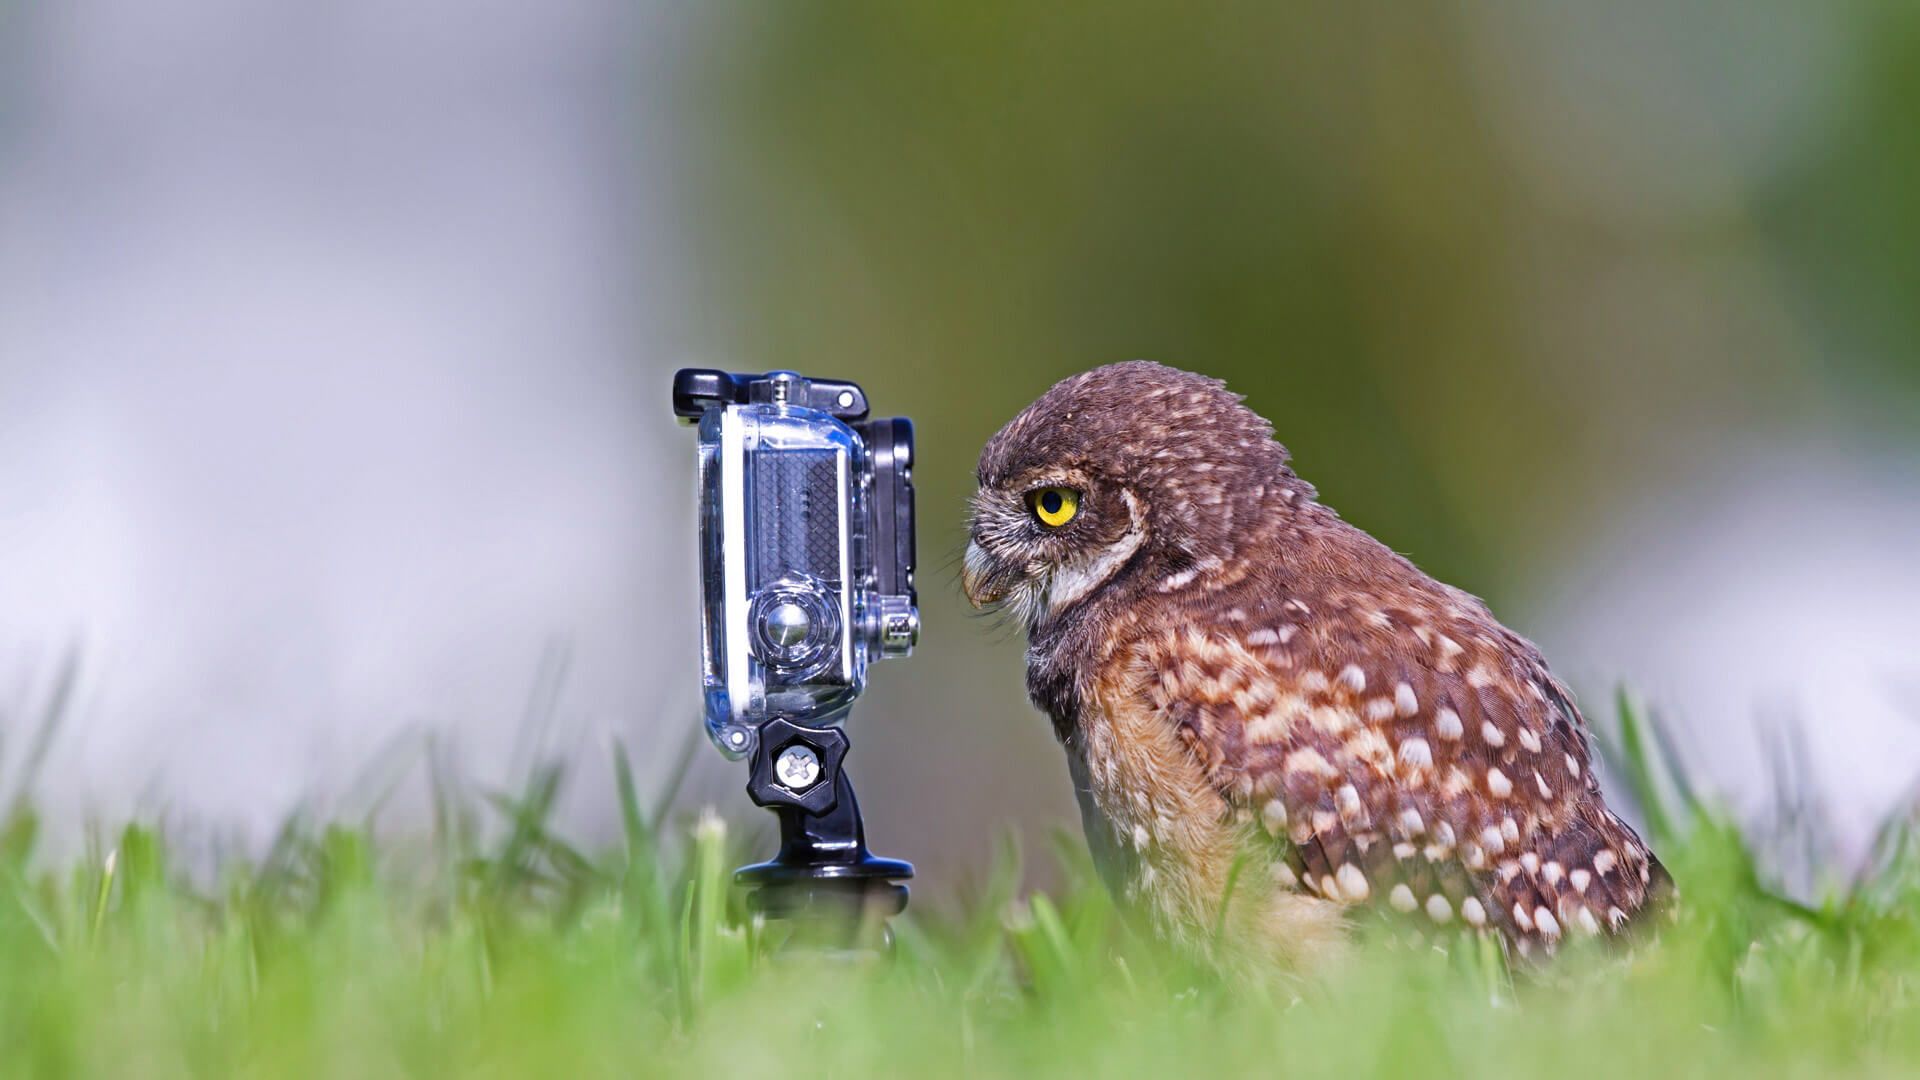 Oh snap! It's National Camera Day